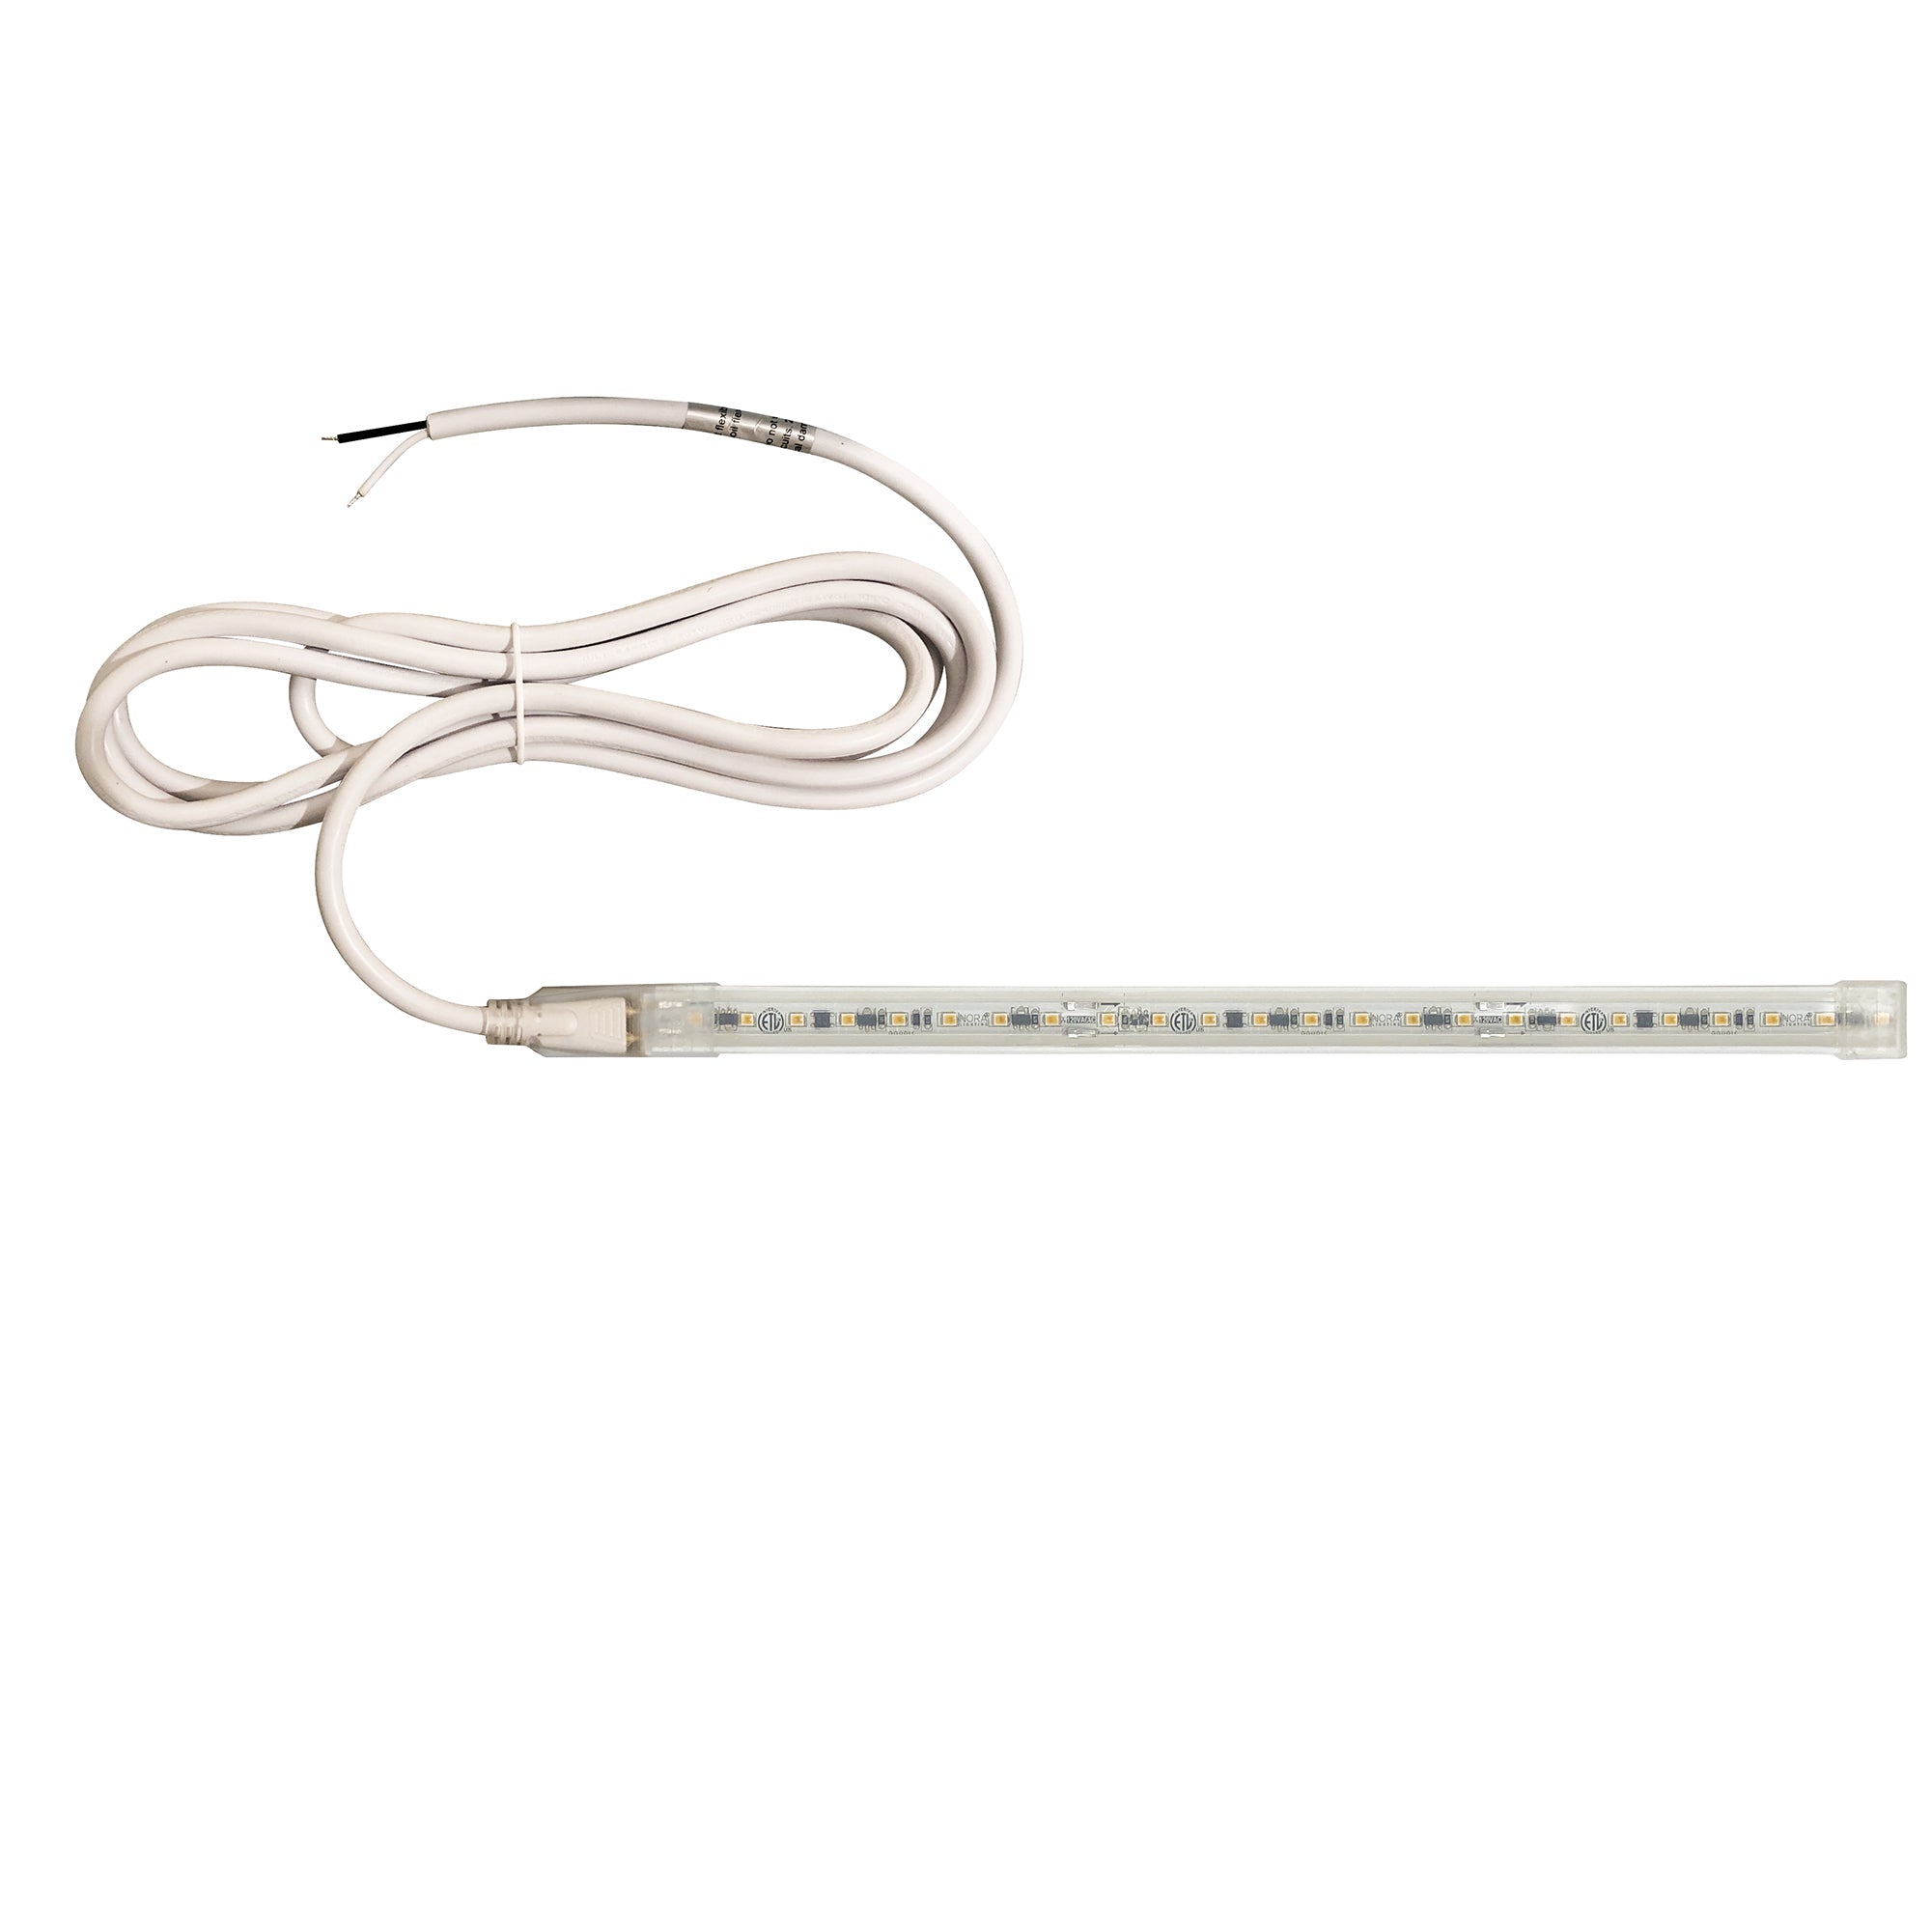 Nora Lighting NUTP13-W46-12-930/HW - Accent / Undercabinet - Custom Cut 46-ft 120V Continuous LED Tape Light, 330lm / 3.6W per foot, 3000K, w/ Mounting Clips and 8' Hardwired Power Cord